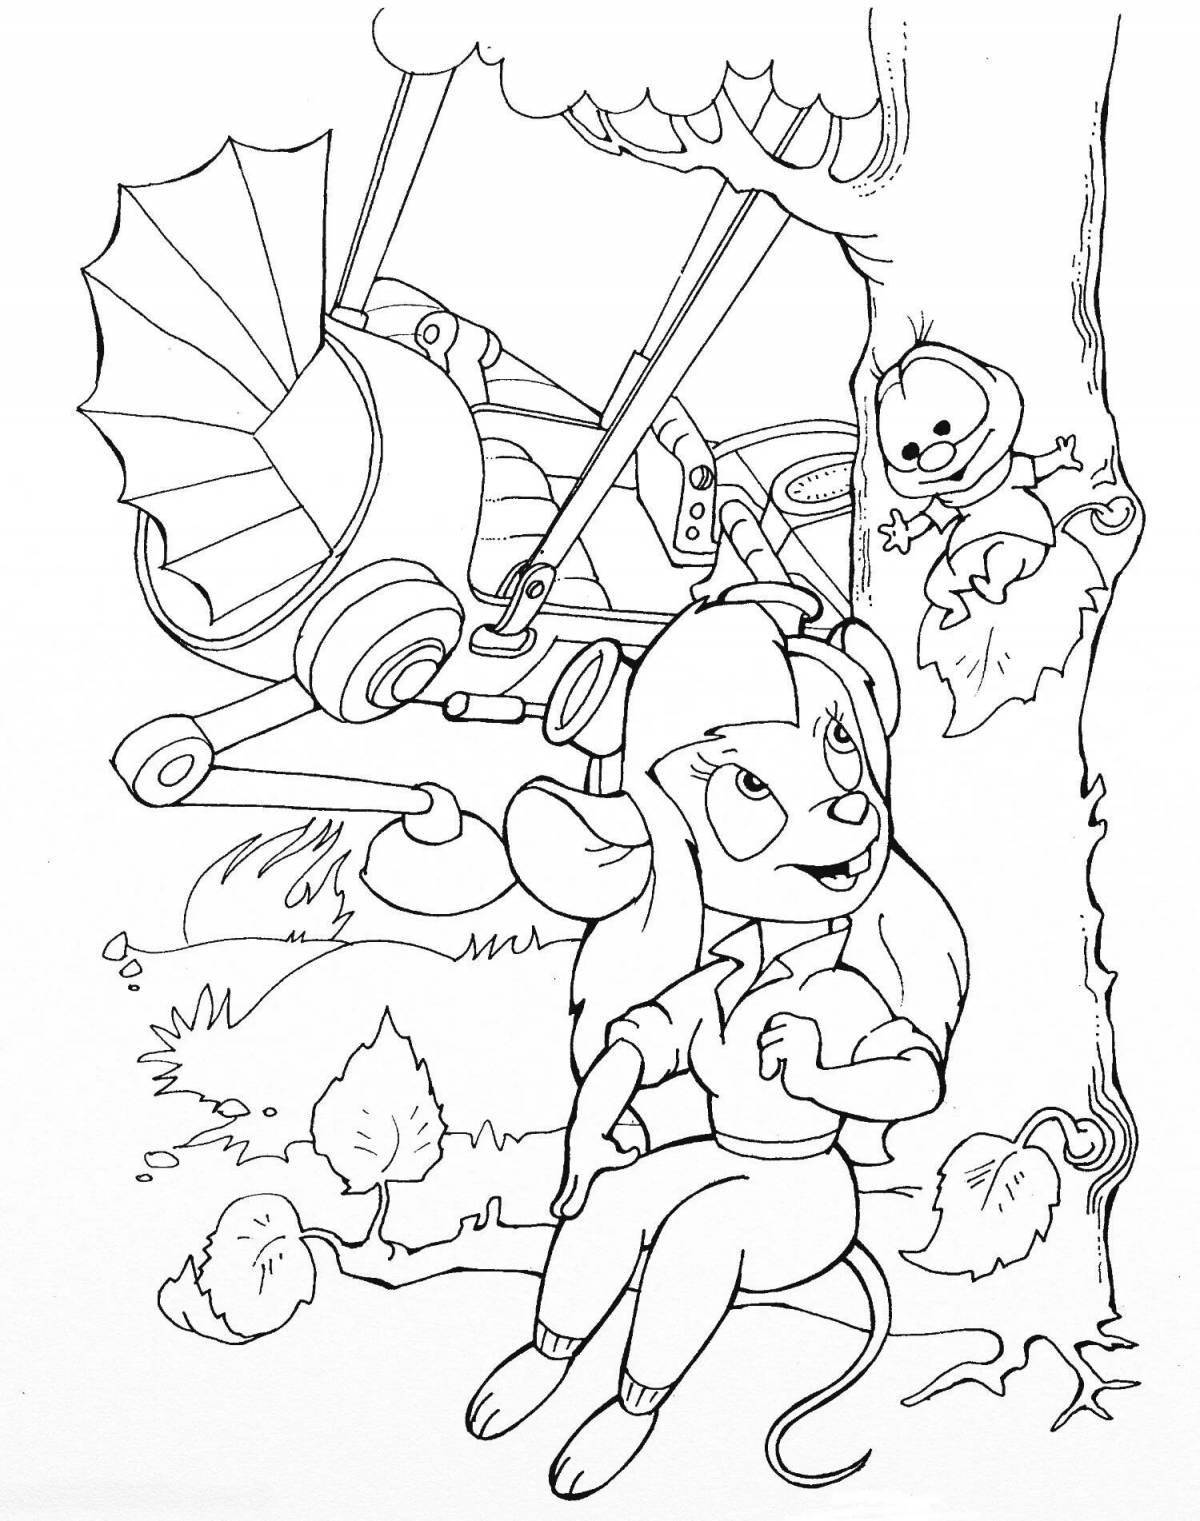 Wonderful chip and dale coloring pages for kids